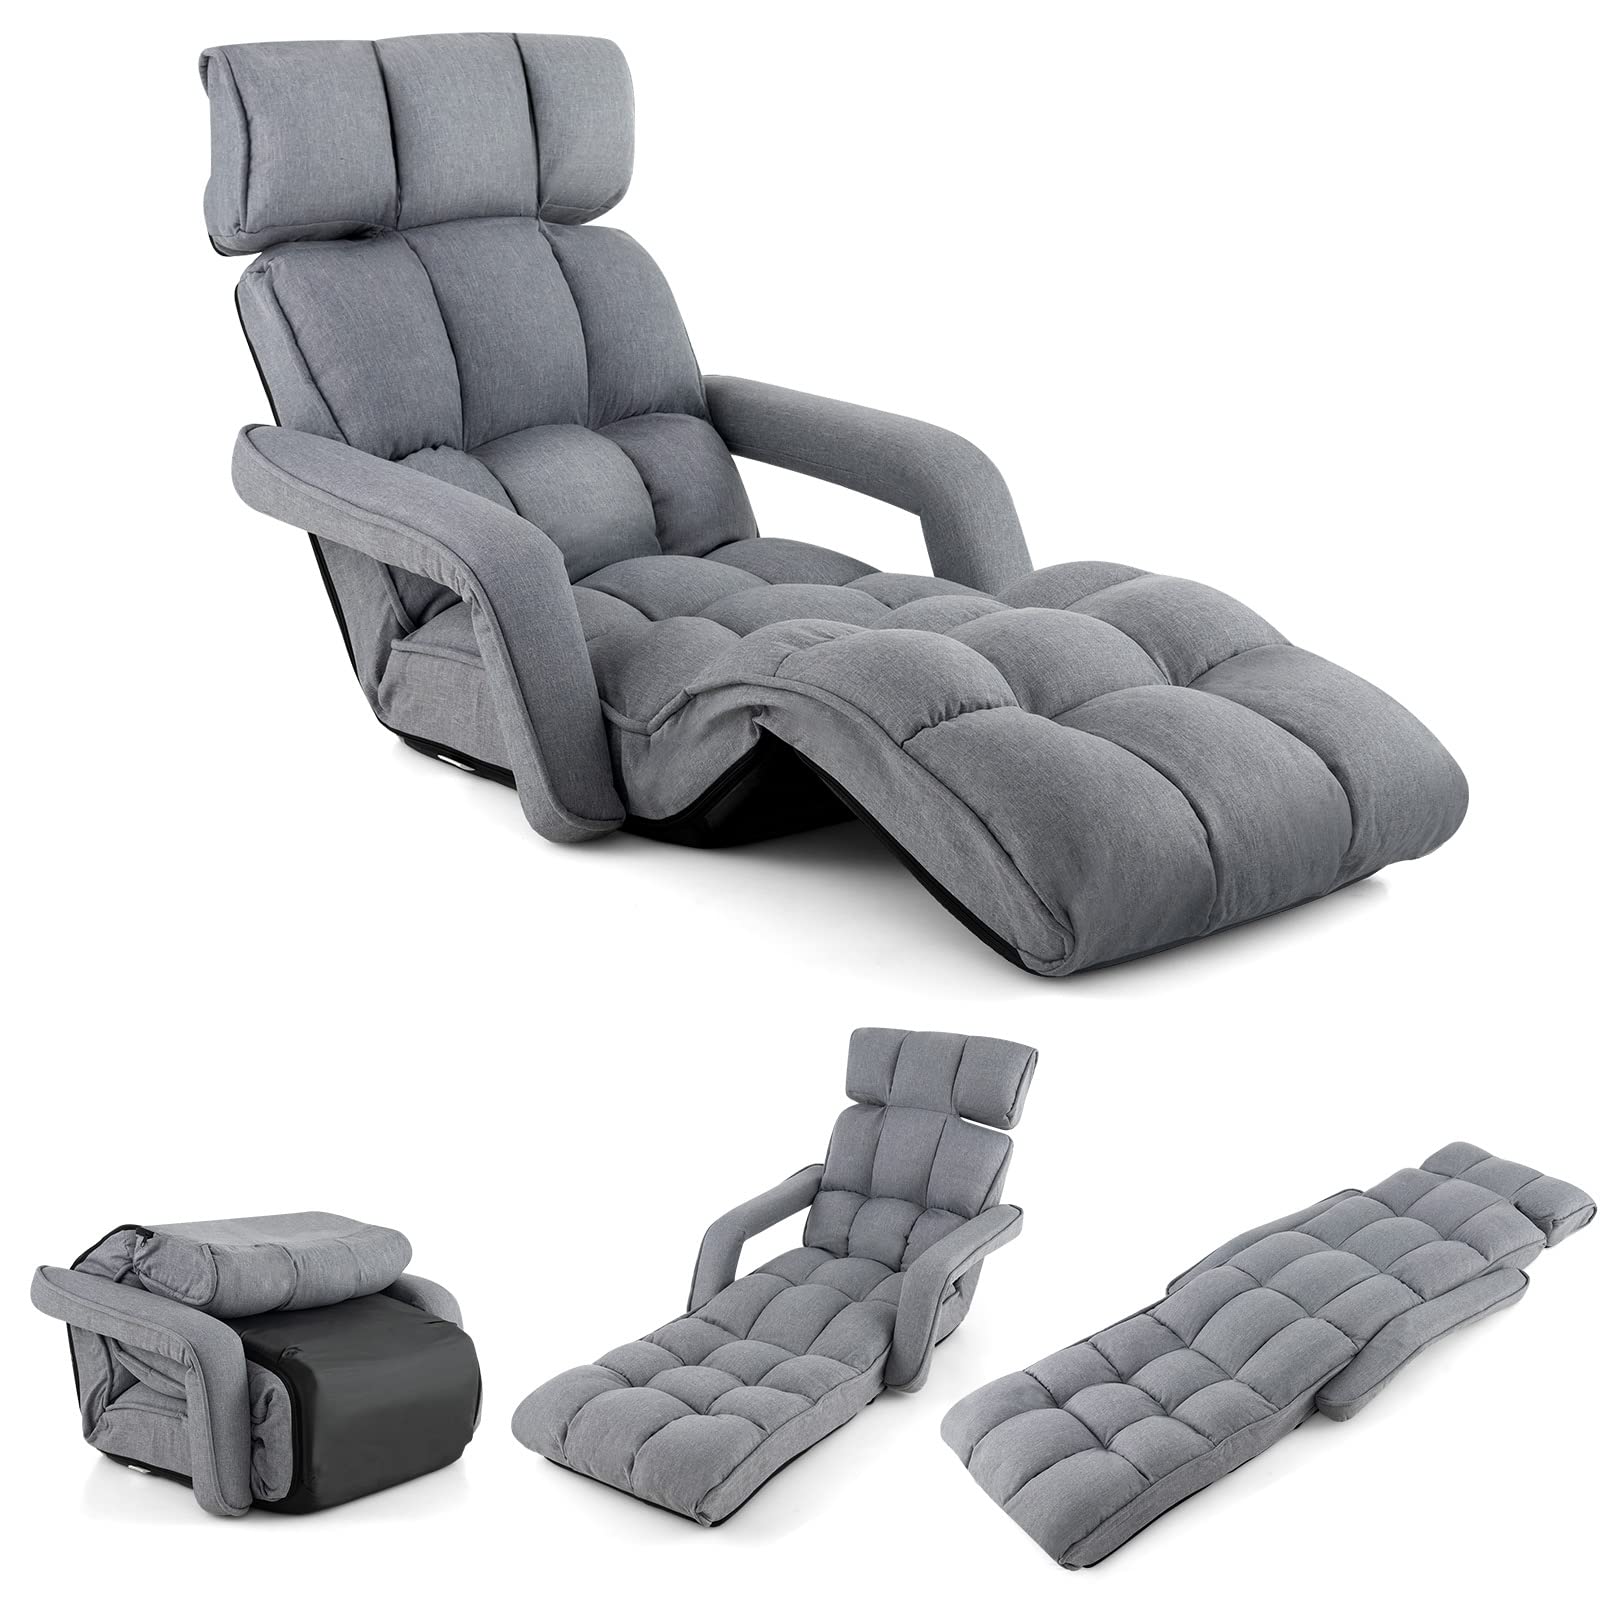 Giantex Foldable Lazy Sofa Bed, 6-Position Adjustable Floor Chair Chaise Lounge with Armrest and Footrest (Gray)